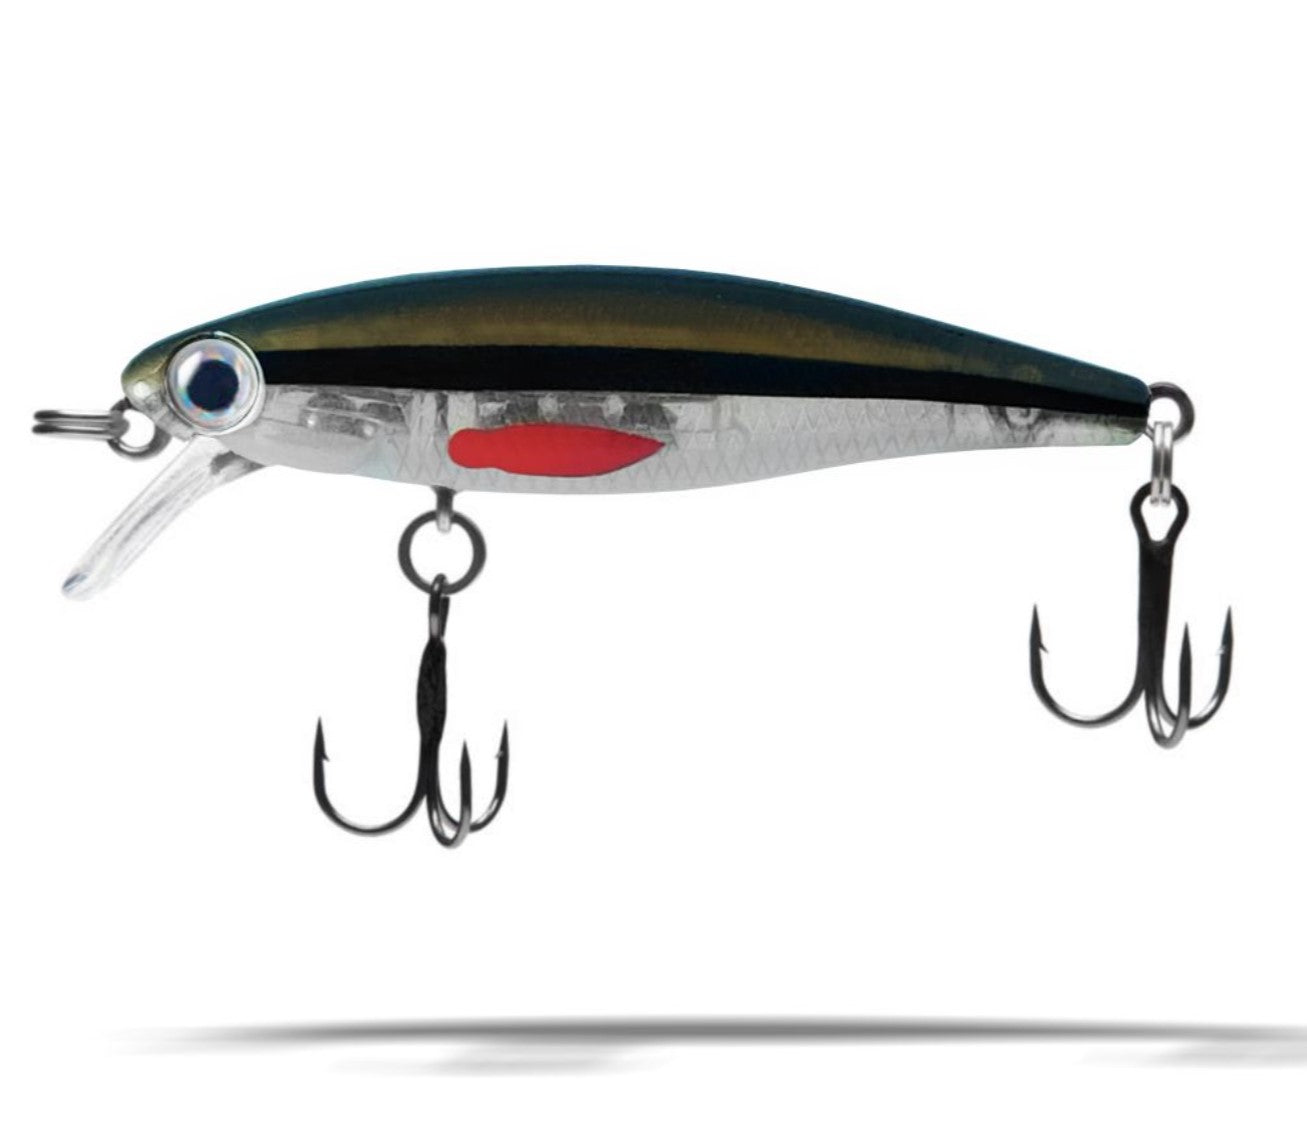 Dynamic Lures HD Trout (Redfin Shiner) – Trophy Trout Lures and